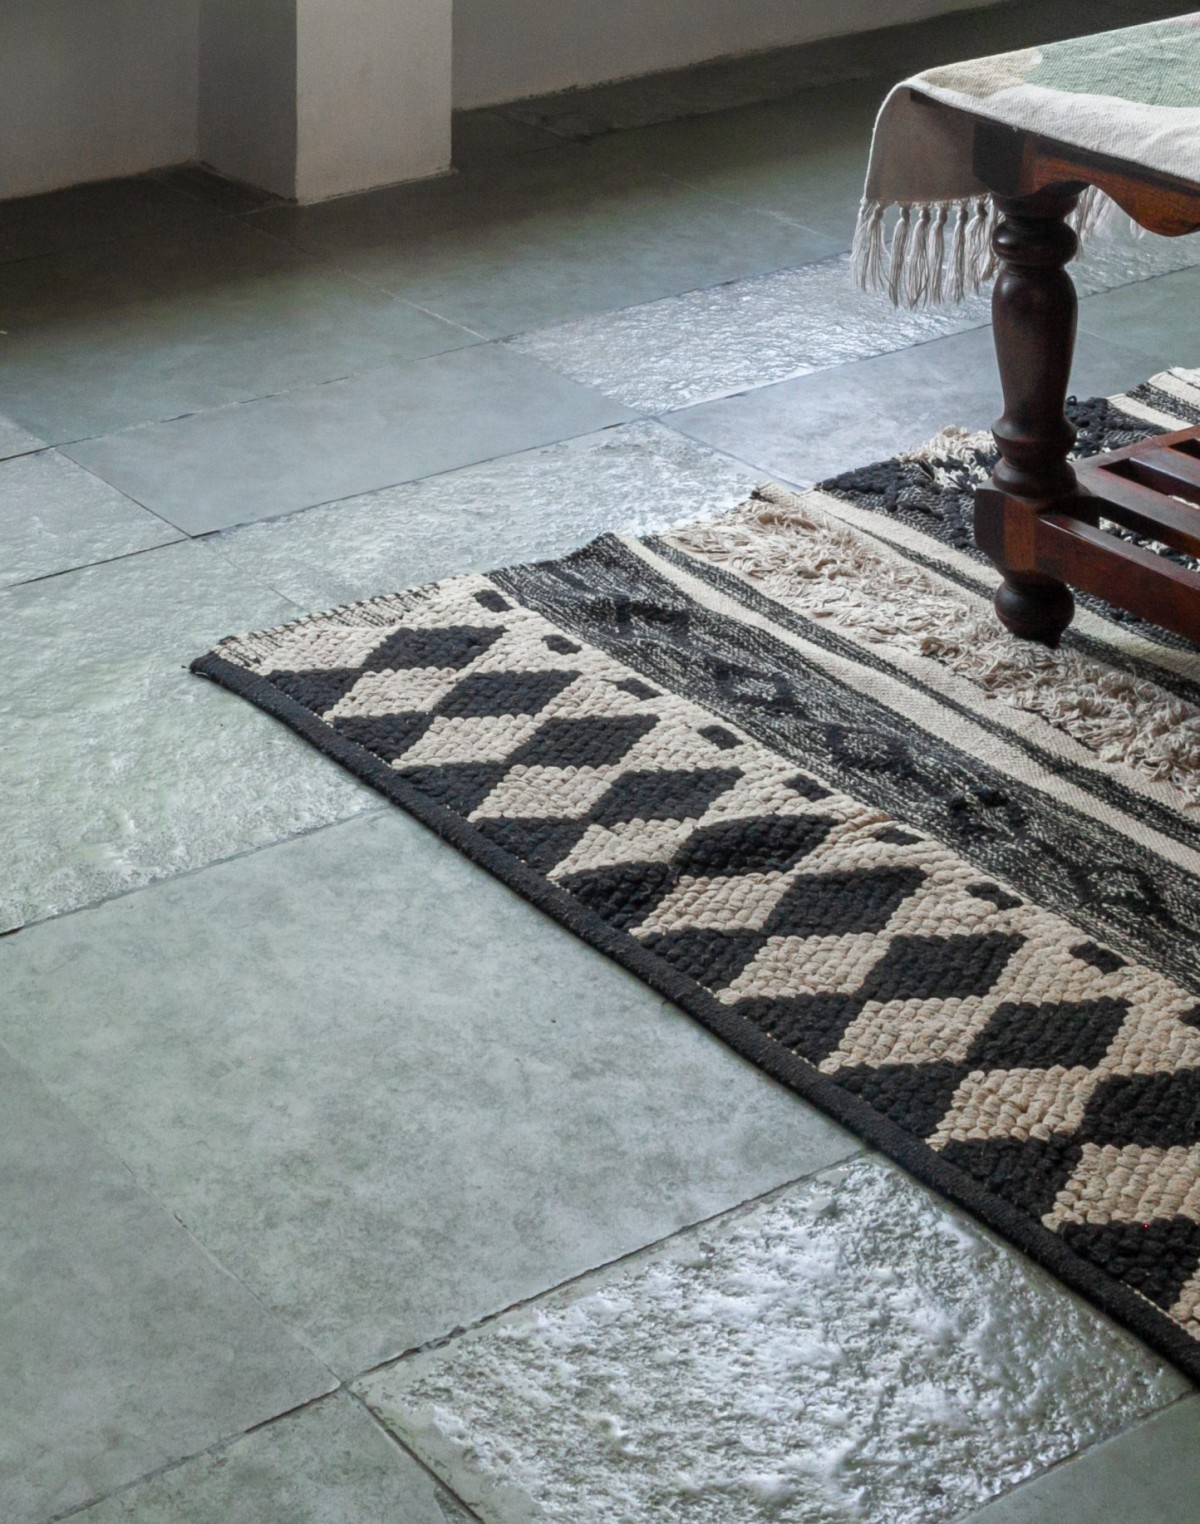 Textured Kota stone flooring adding tactile appeal to the space